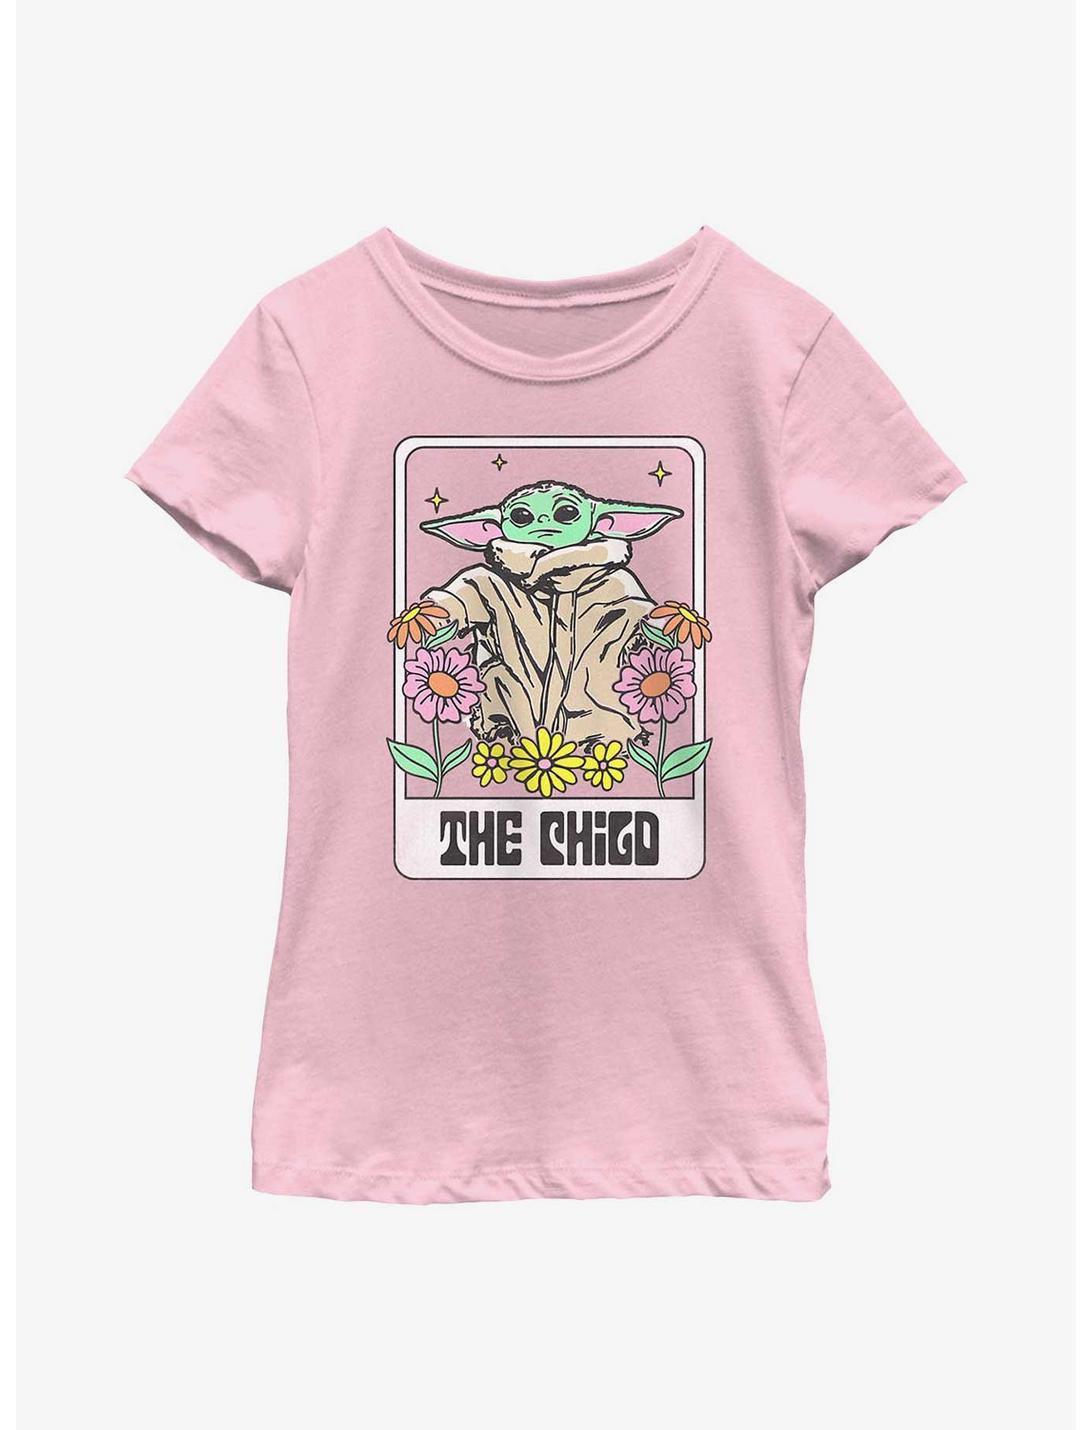 Star Wars The Mandalorian The Child Floral Youth Girls T-Shirt, PINK, hi-res